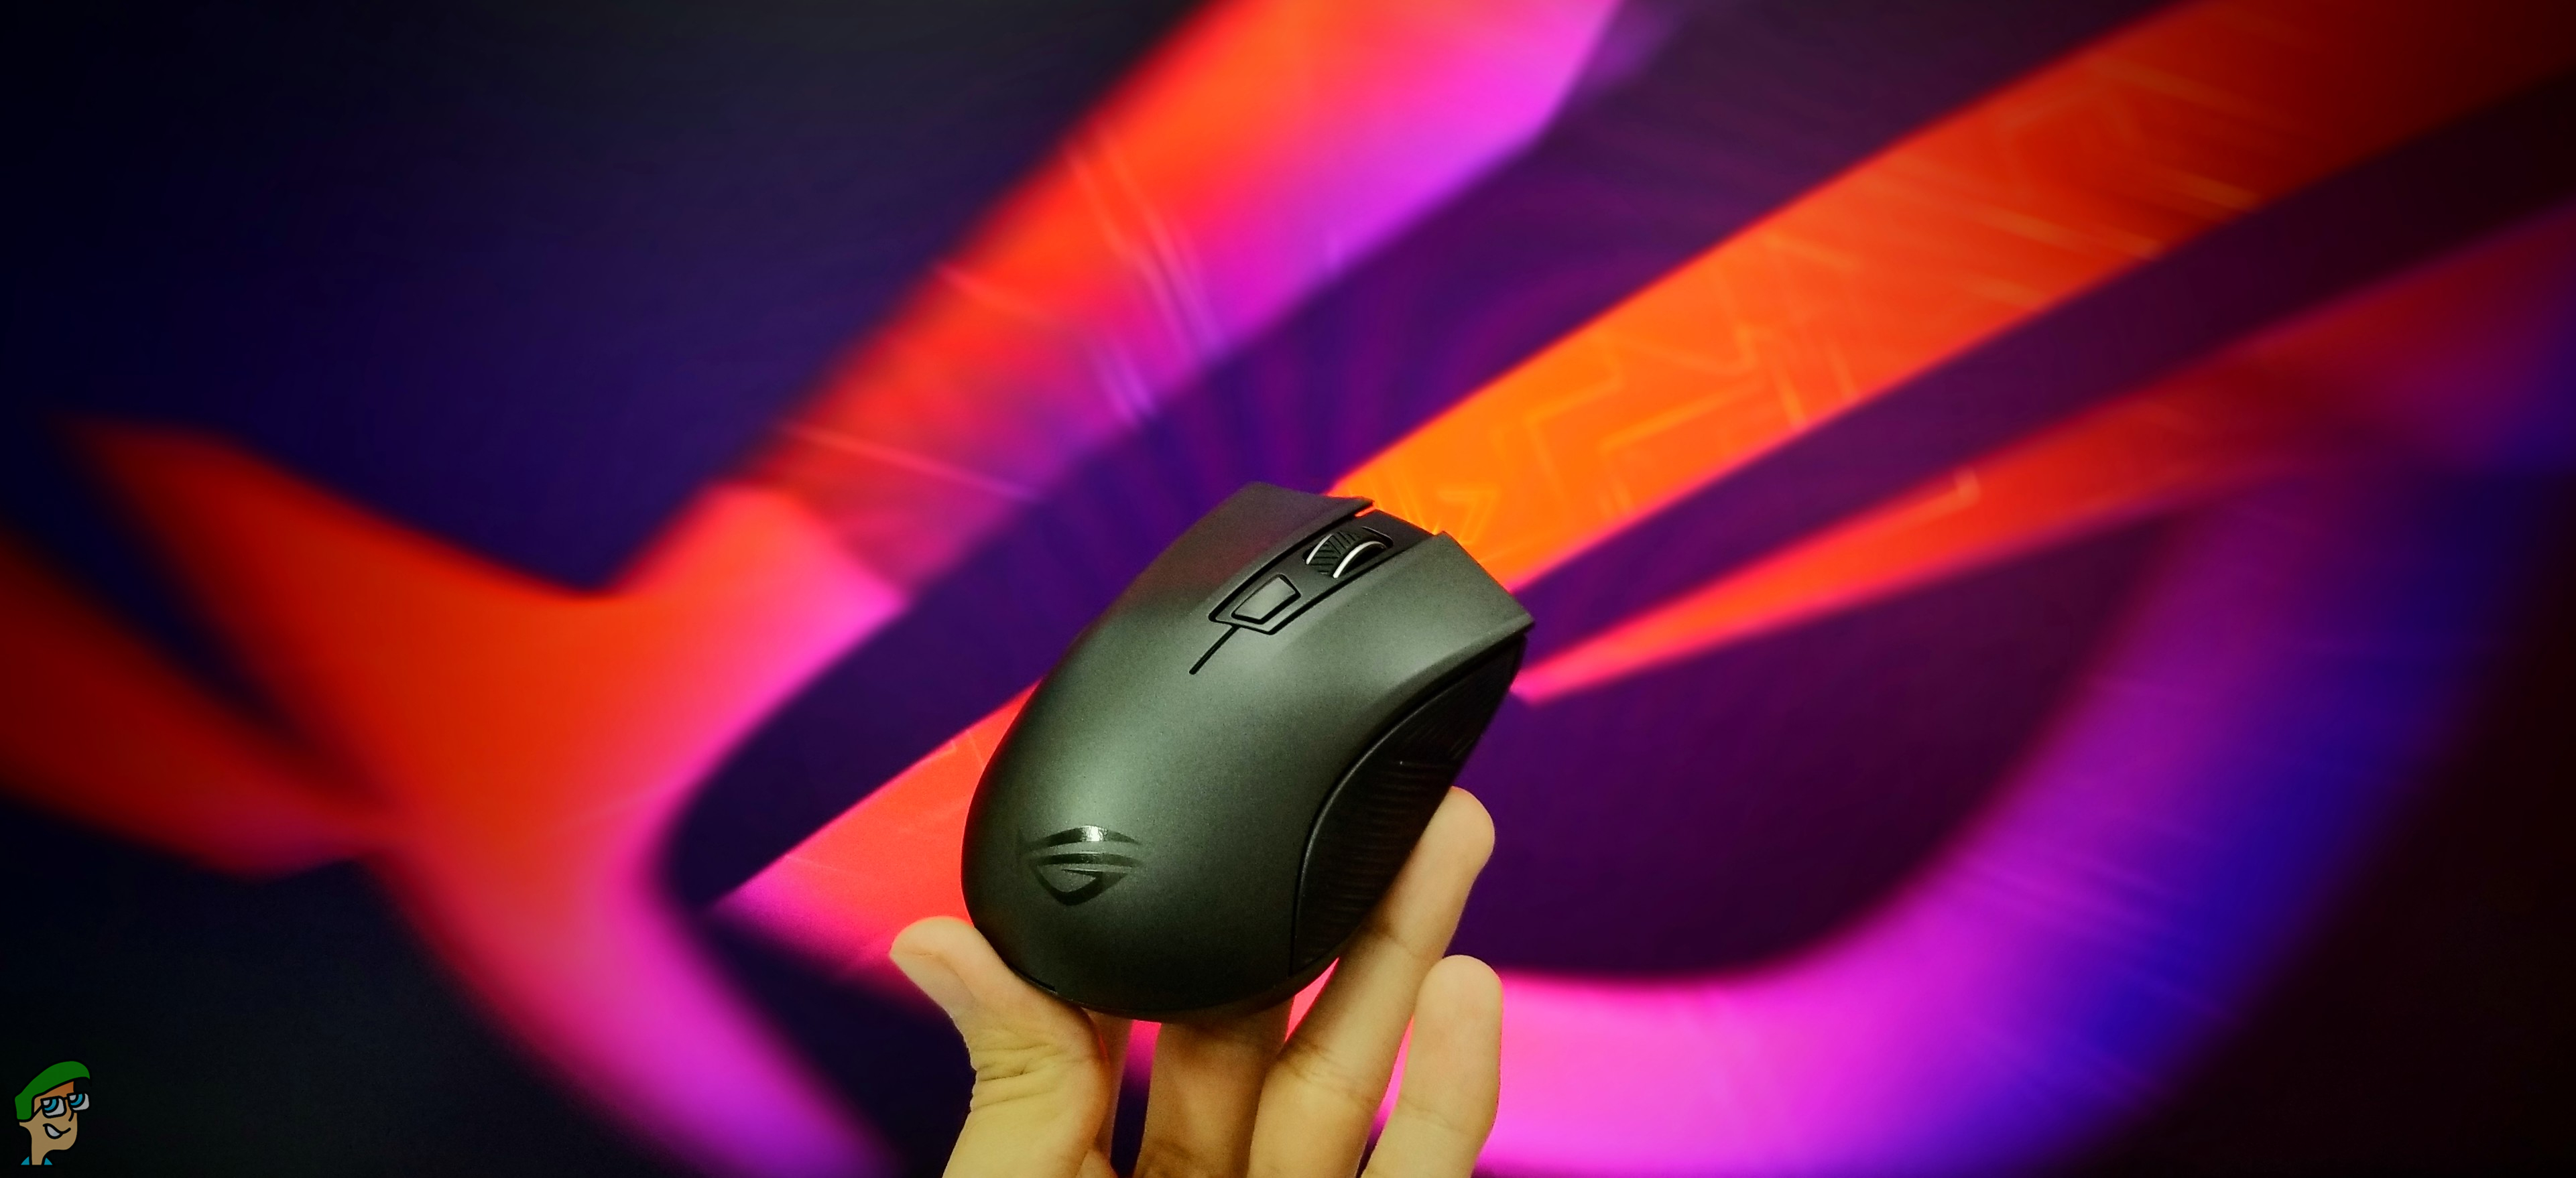 ASUS ROG Strix Carry Wireless Gaming Mouse Review